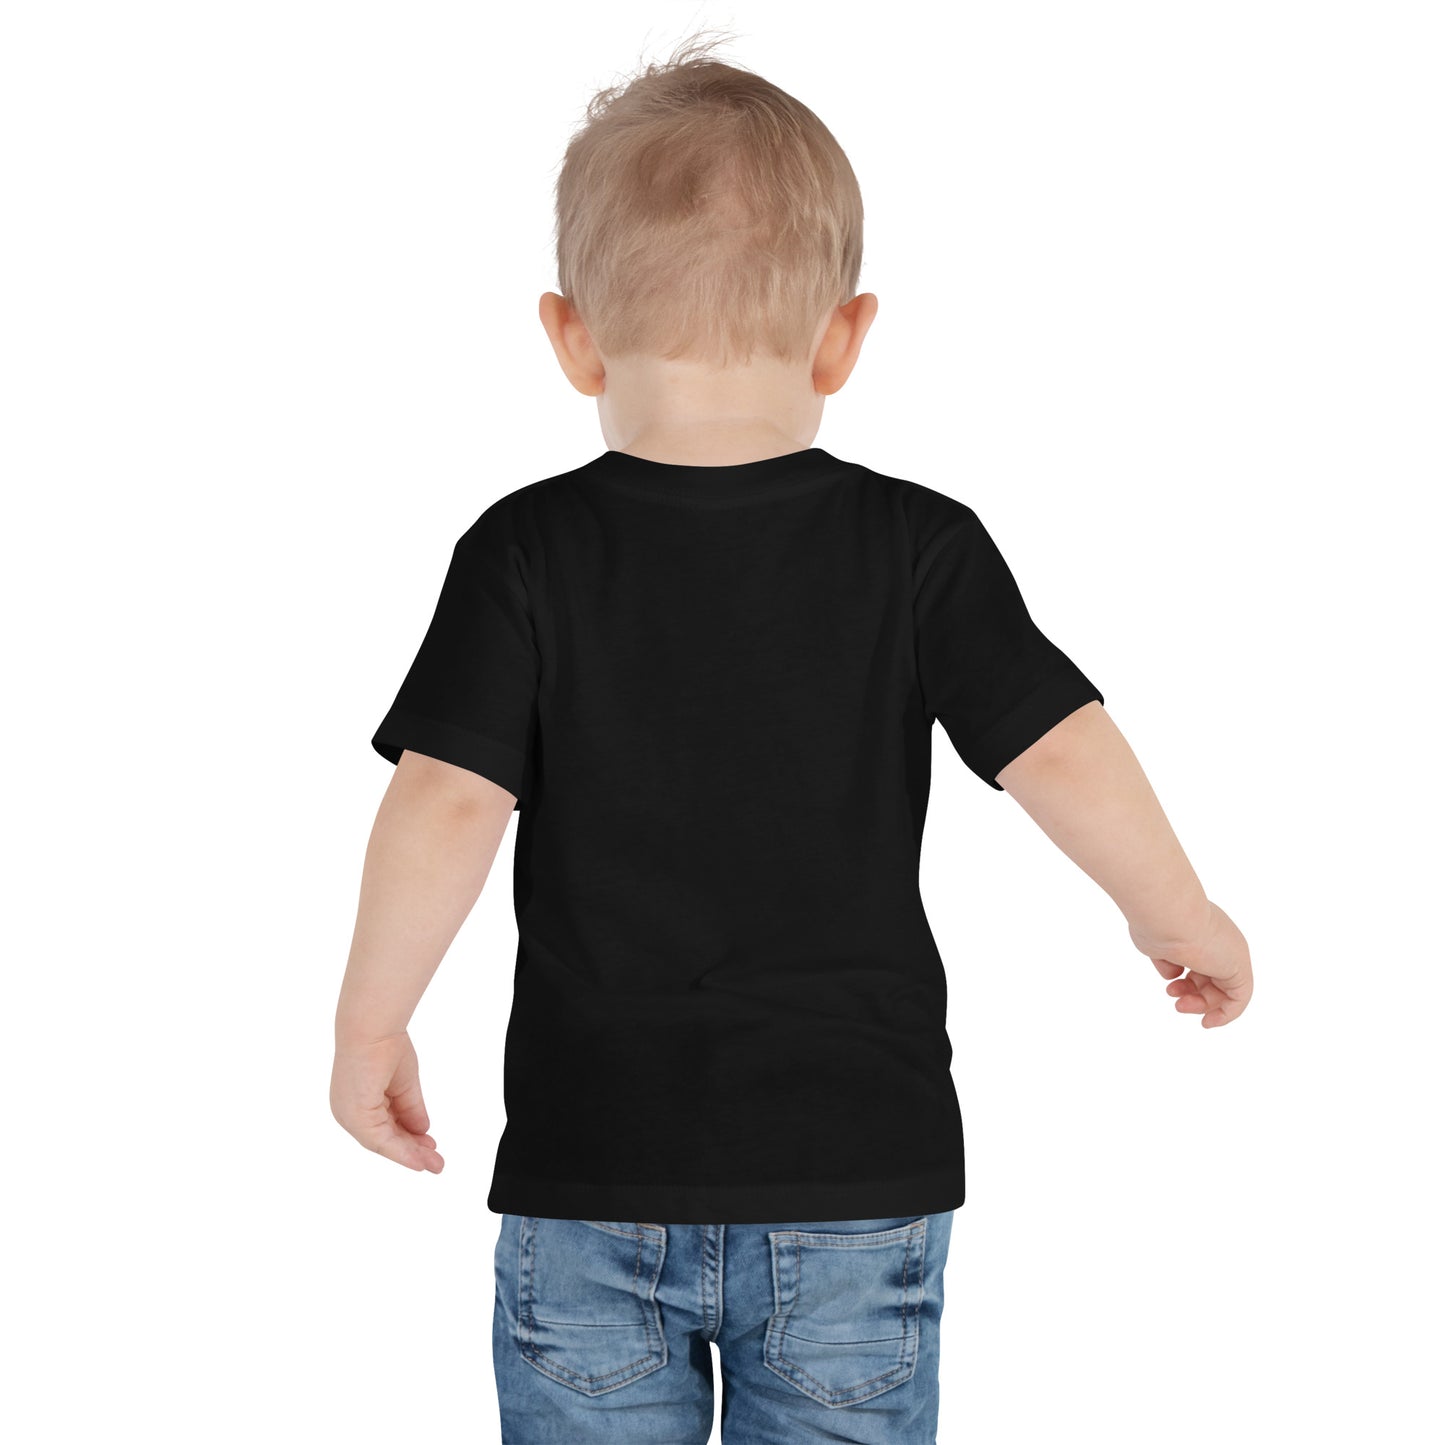 Toddler T-Shirt Cotton: Color Block Blue with Pickleball (black)